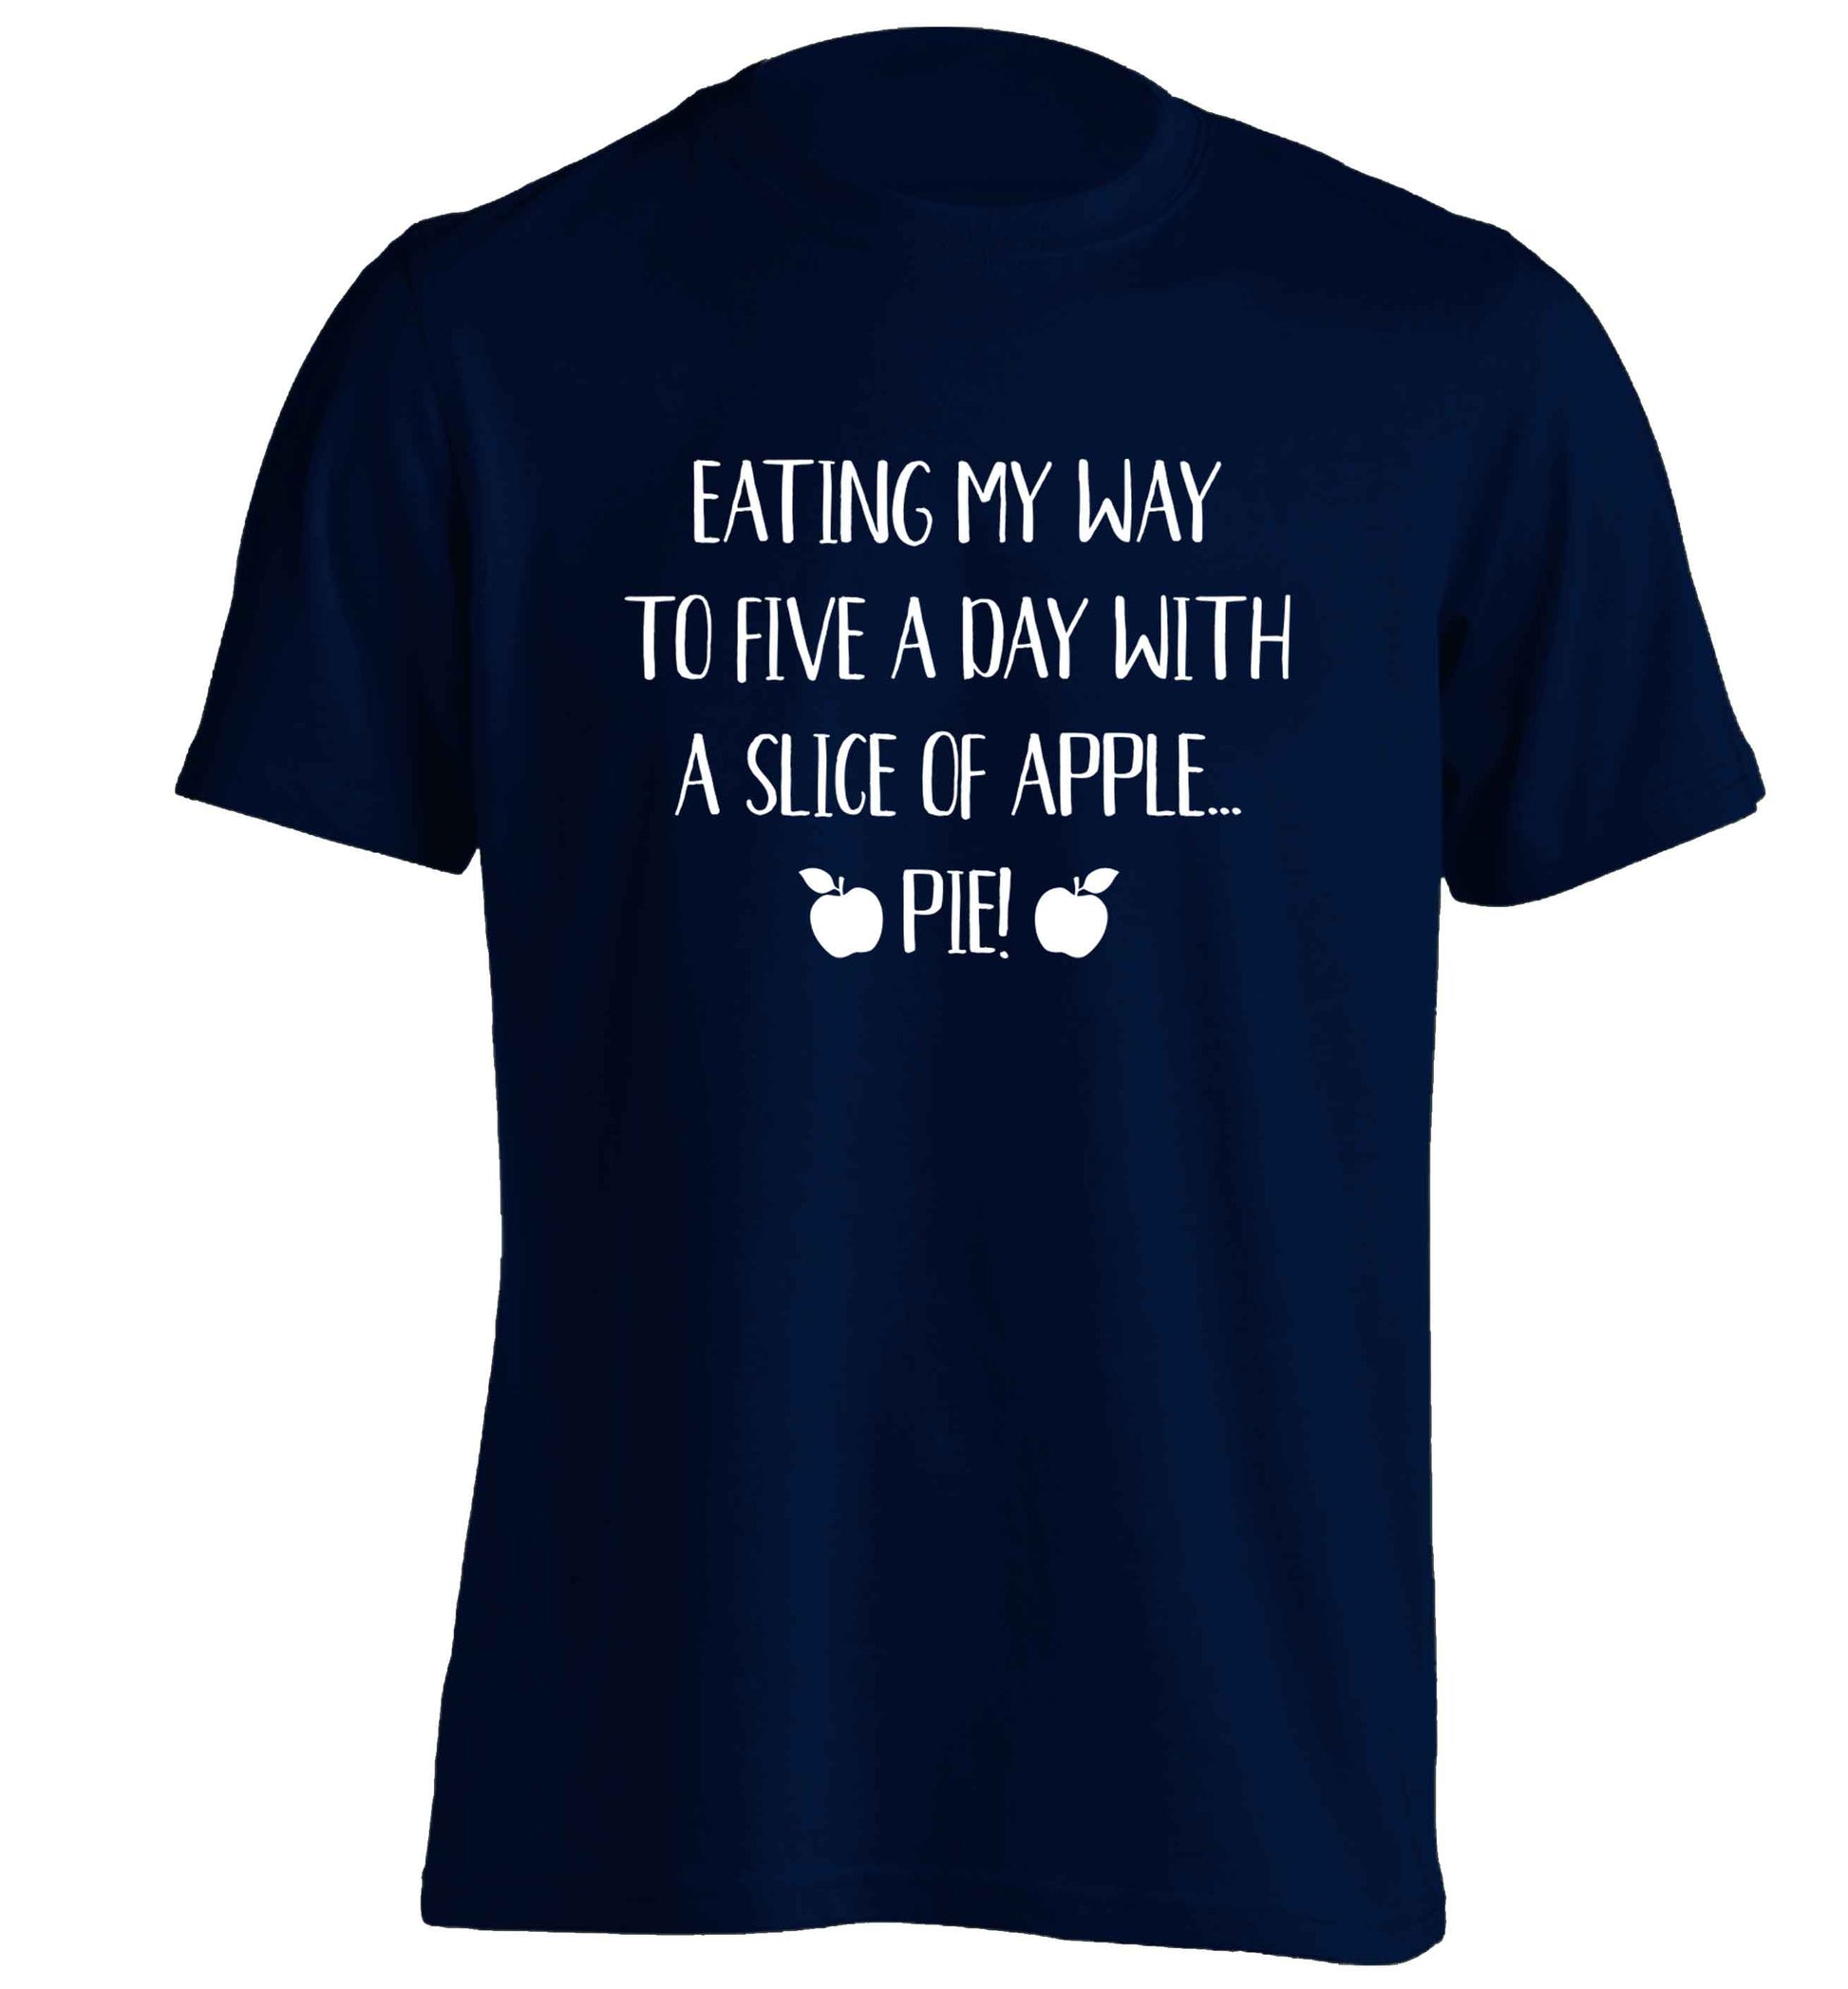 Eating my way to five a day with a slice of apple pie adults unisex navy Tshirt 2XL